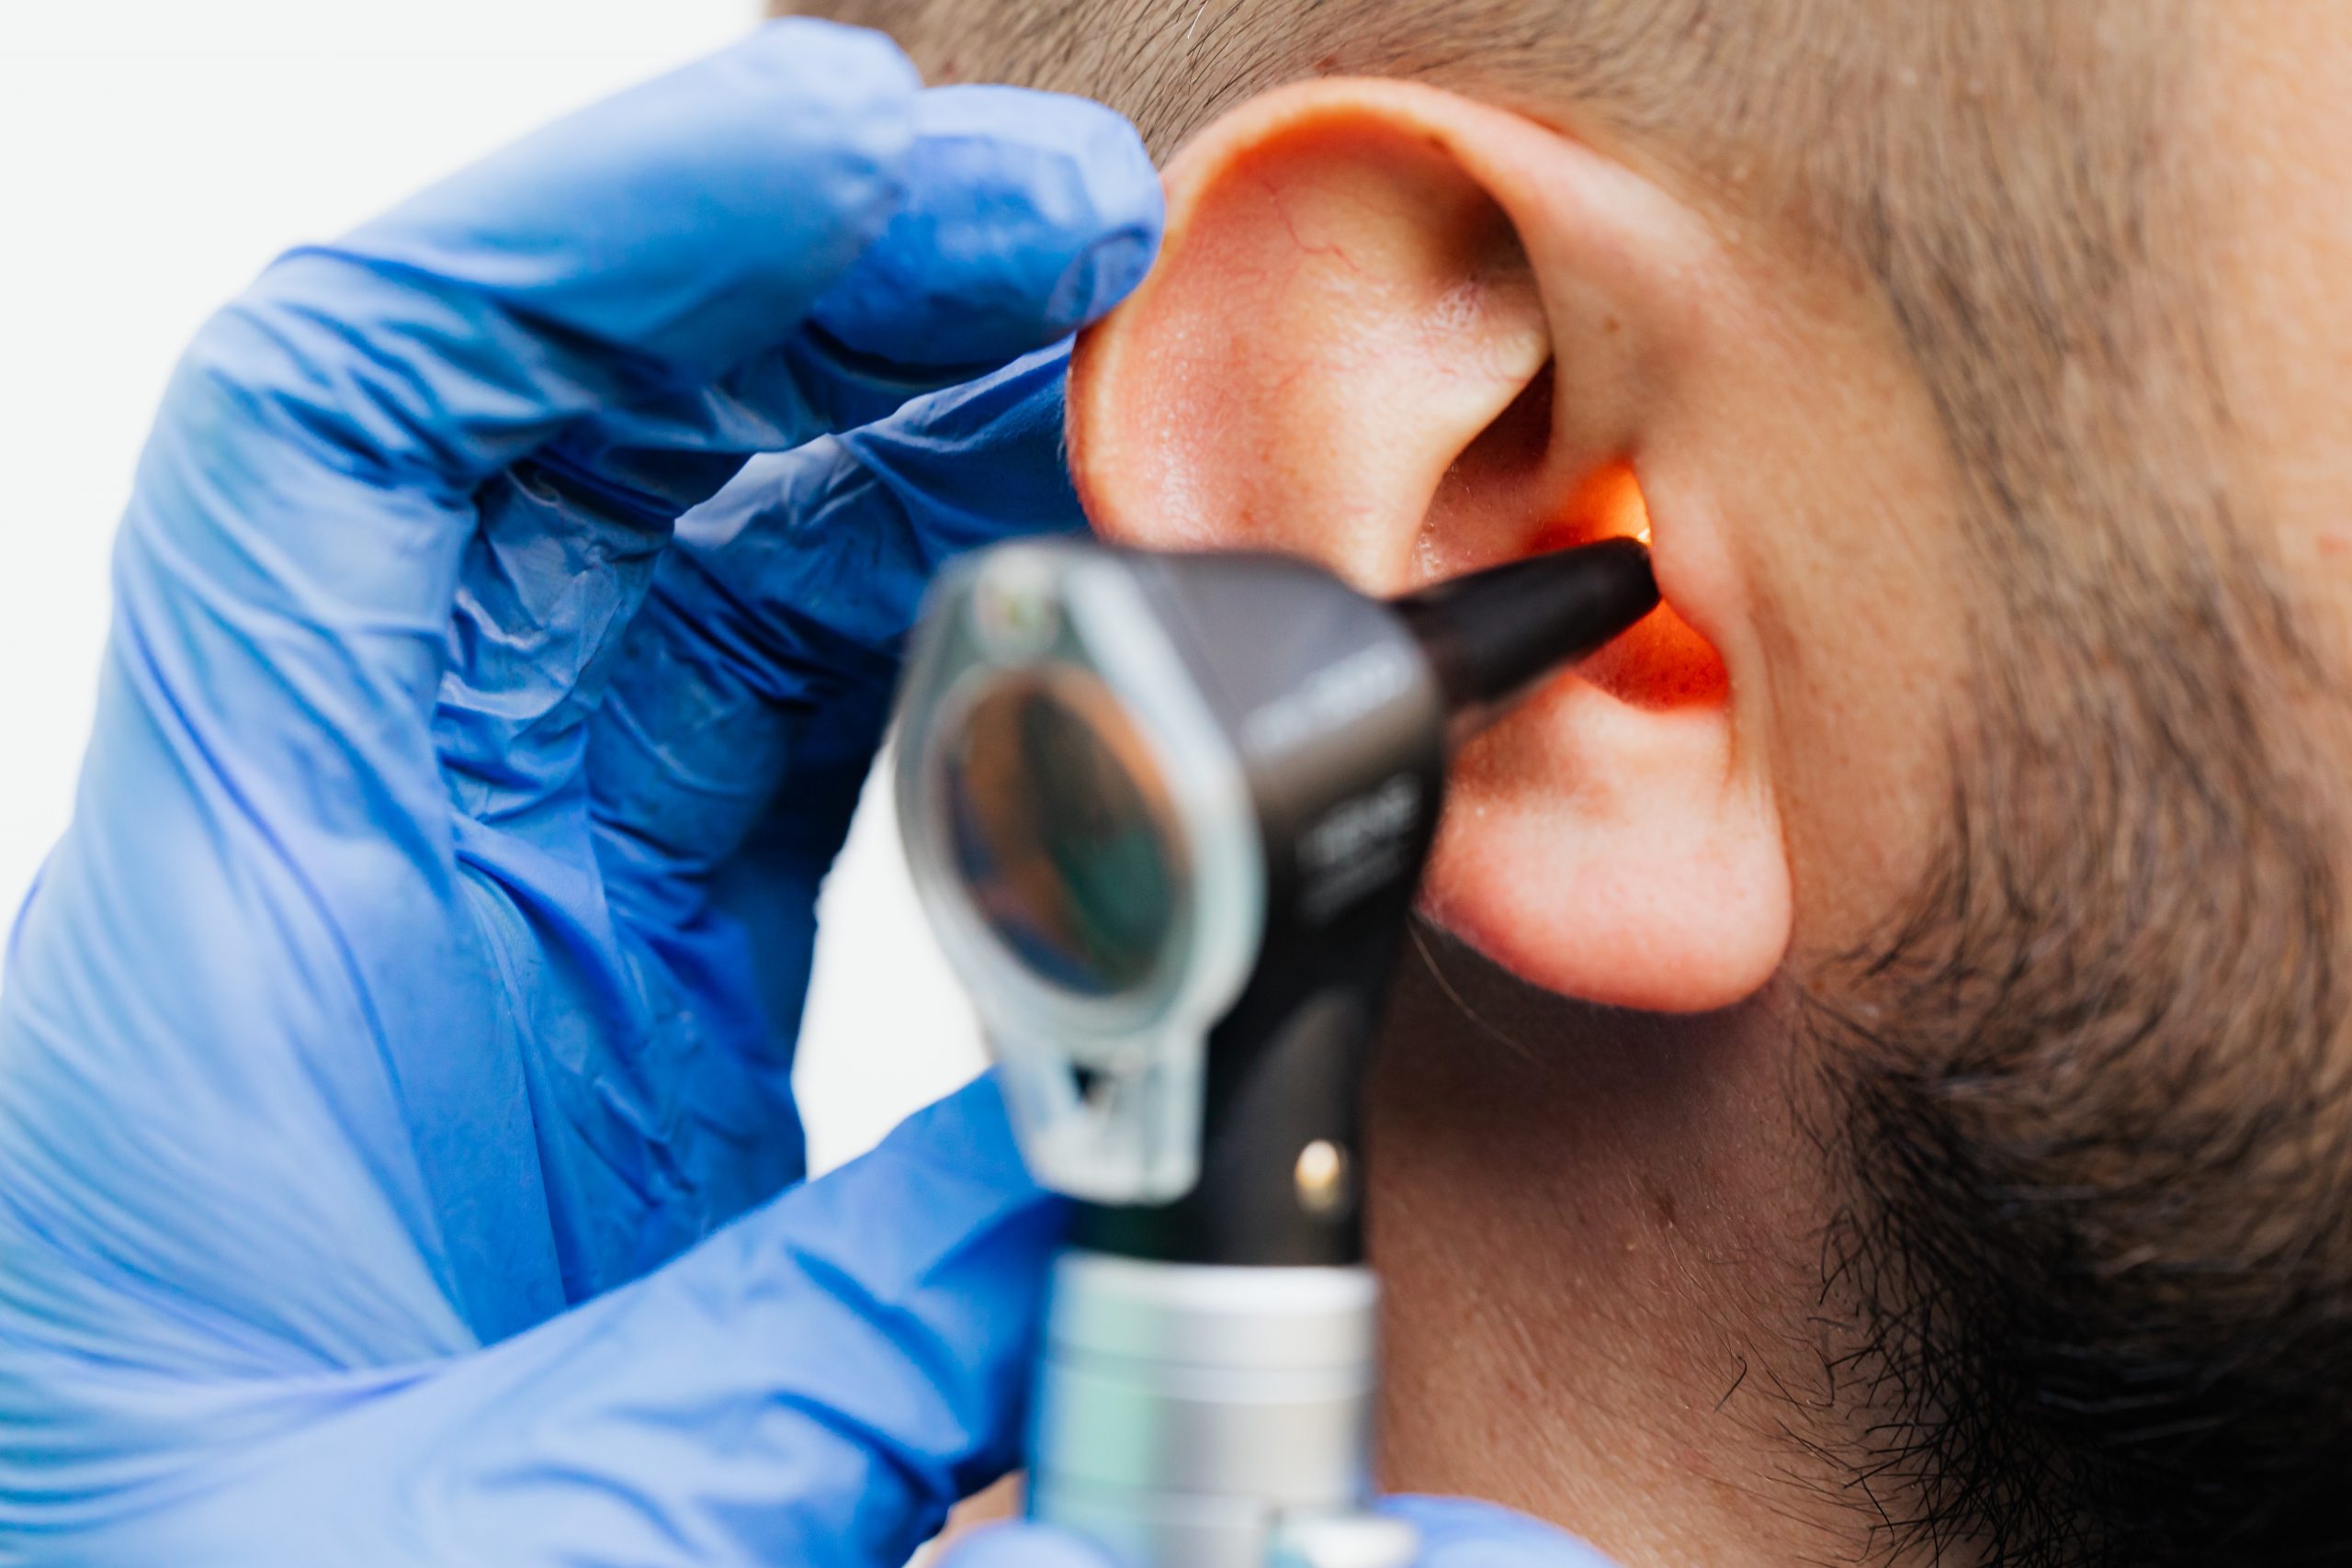 audiologist examining someone's ear